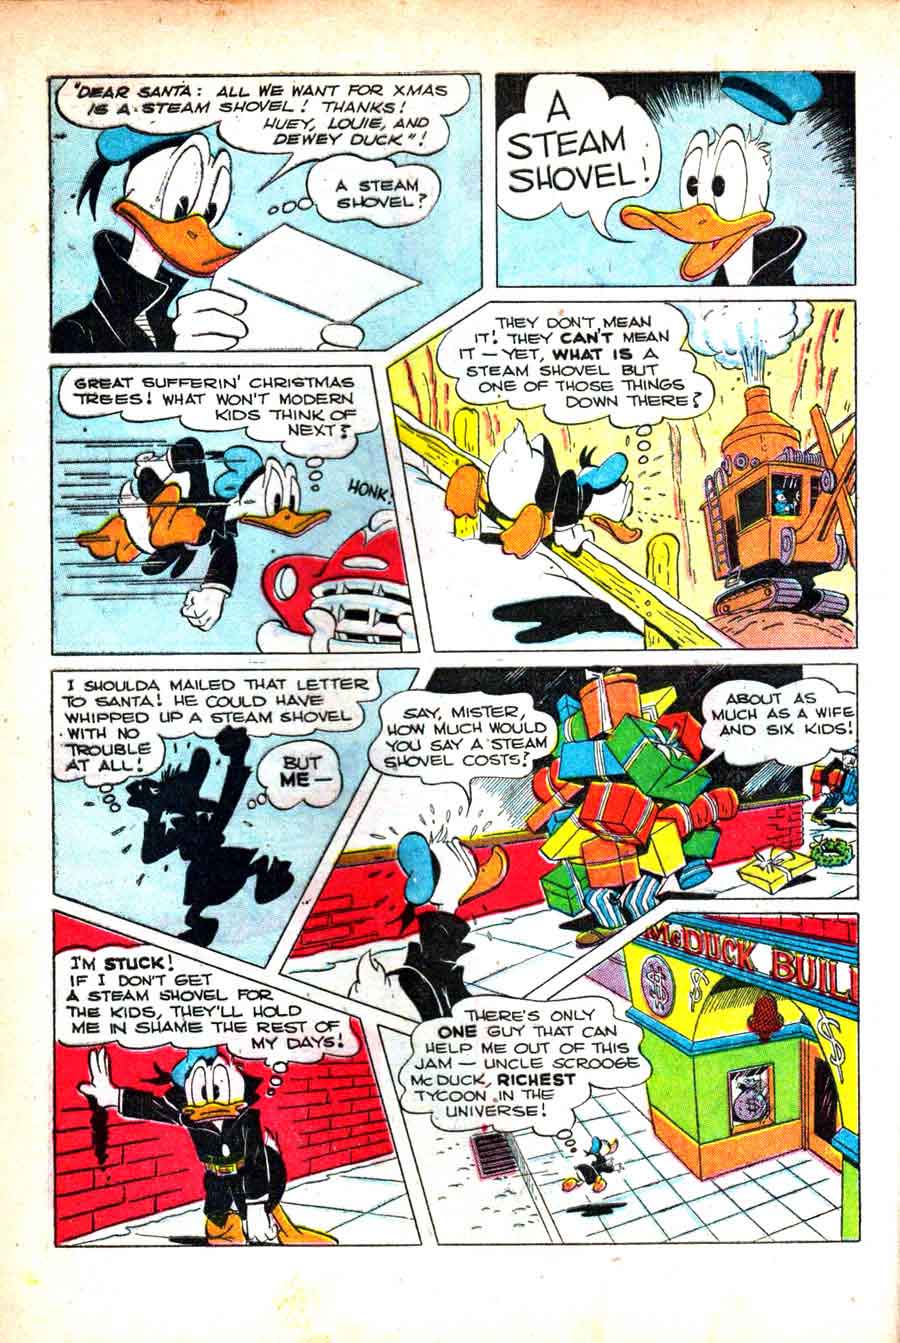 Christmas Parade v1 #1 dell donald duck comic book page art by Carl Barks